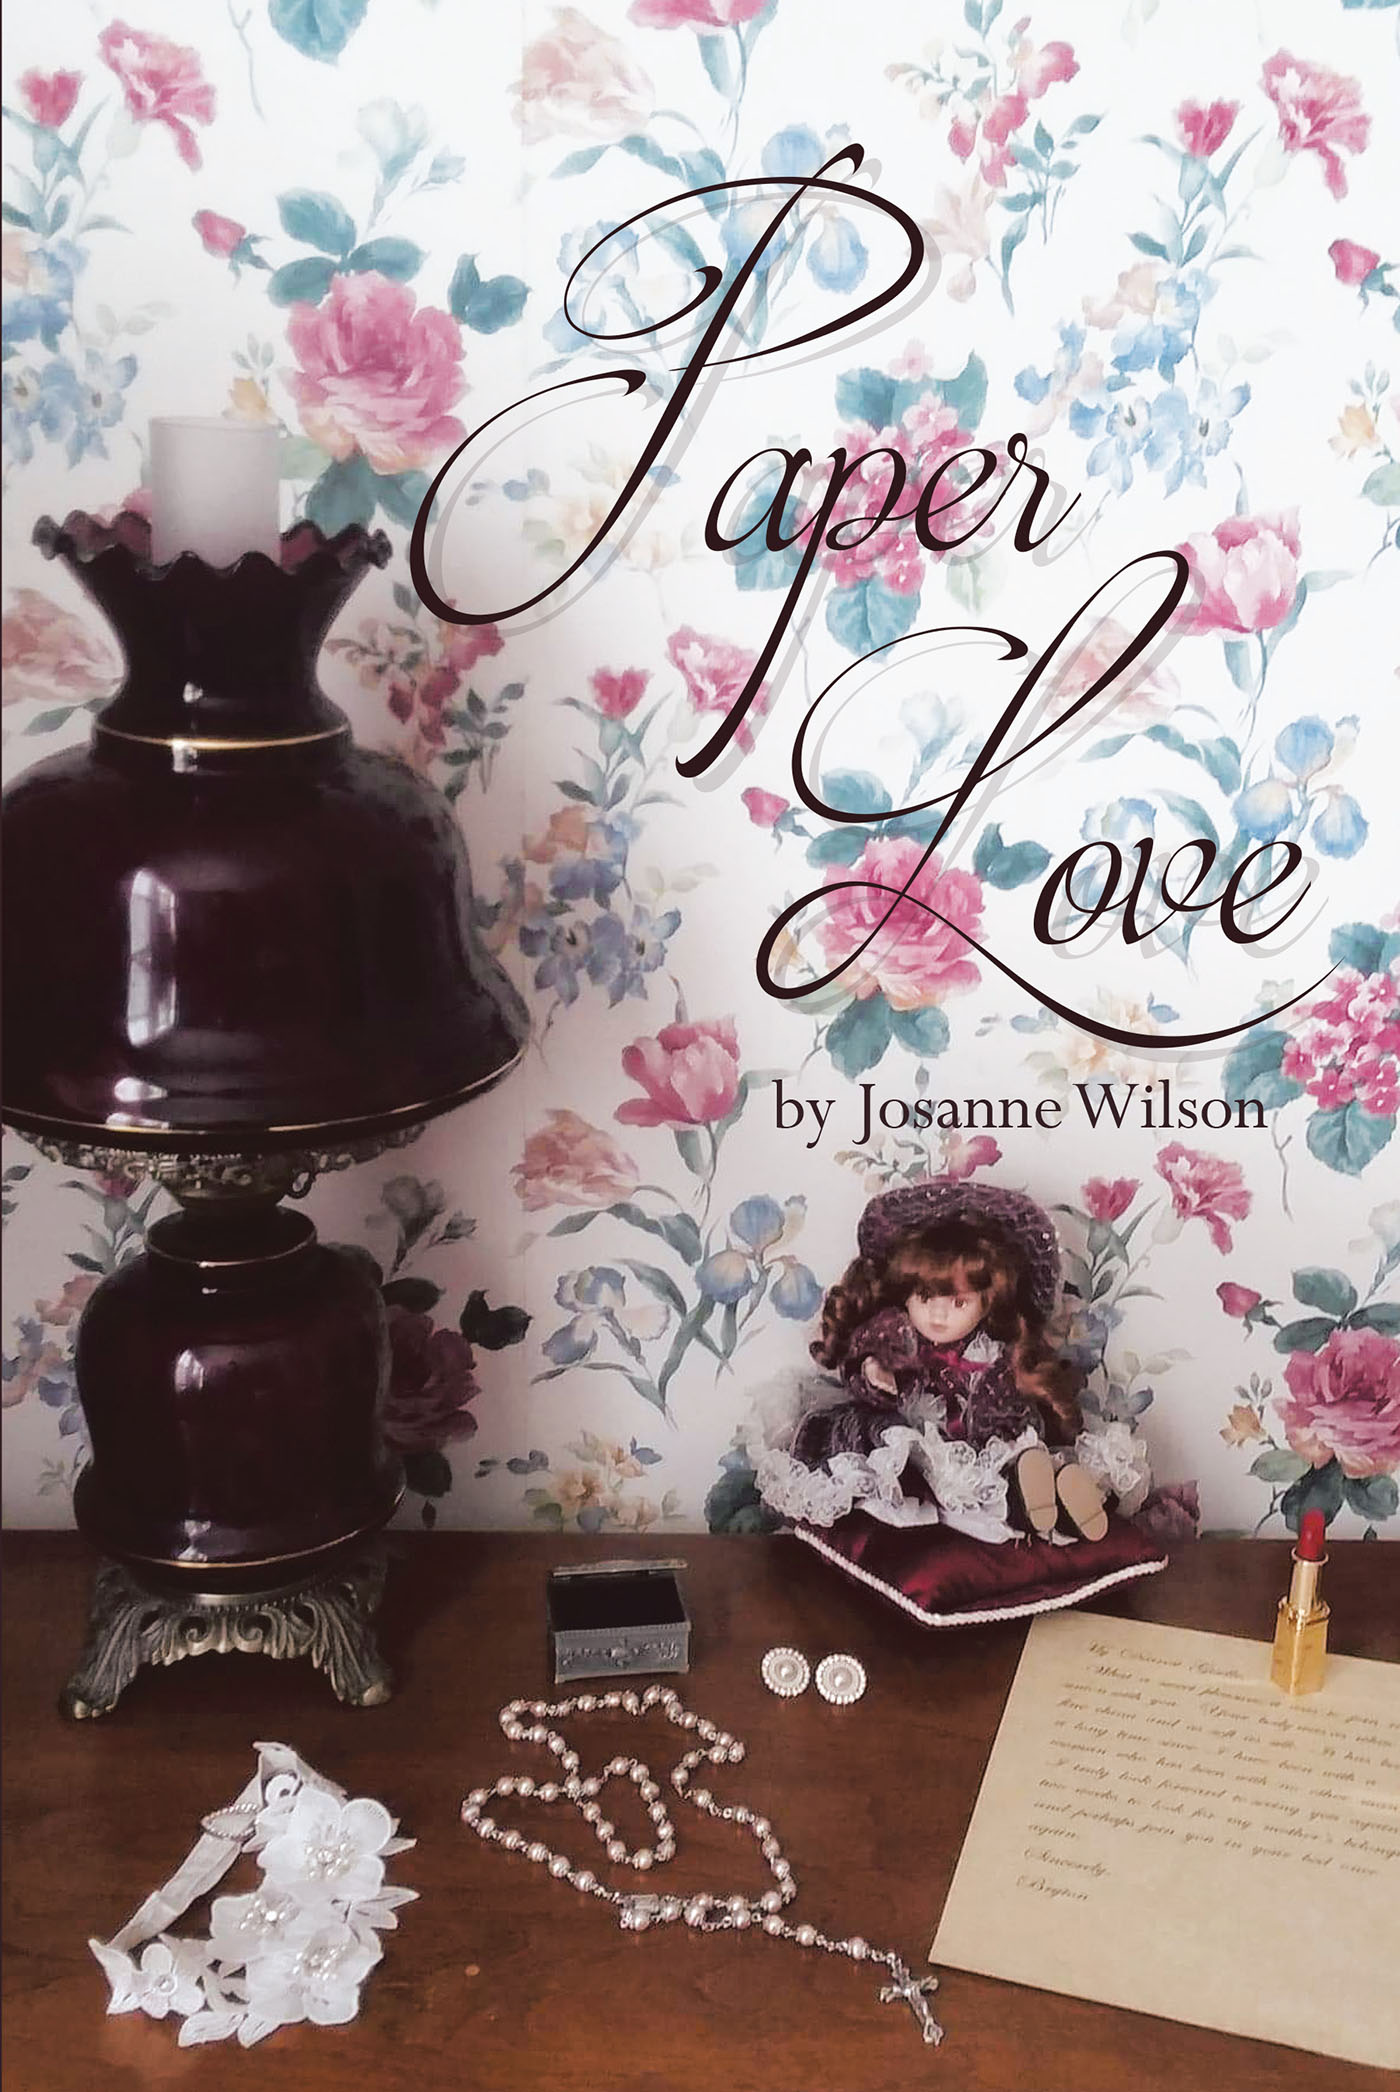 Author Josanne Wilson’s New Book, "Paper Love," is a Mesmerizing & Steamy Romance That Takes Readers Back in Time to 1882 About a Young Woman Finding First Love